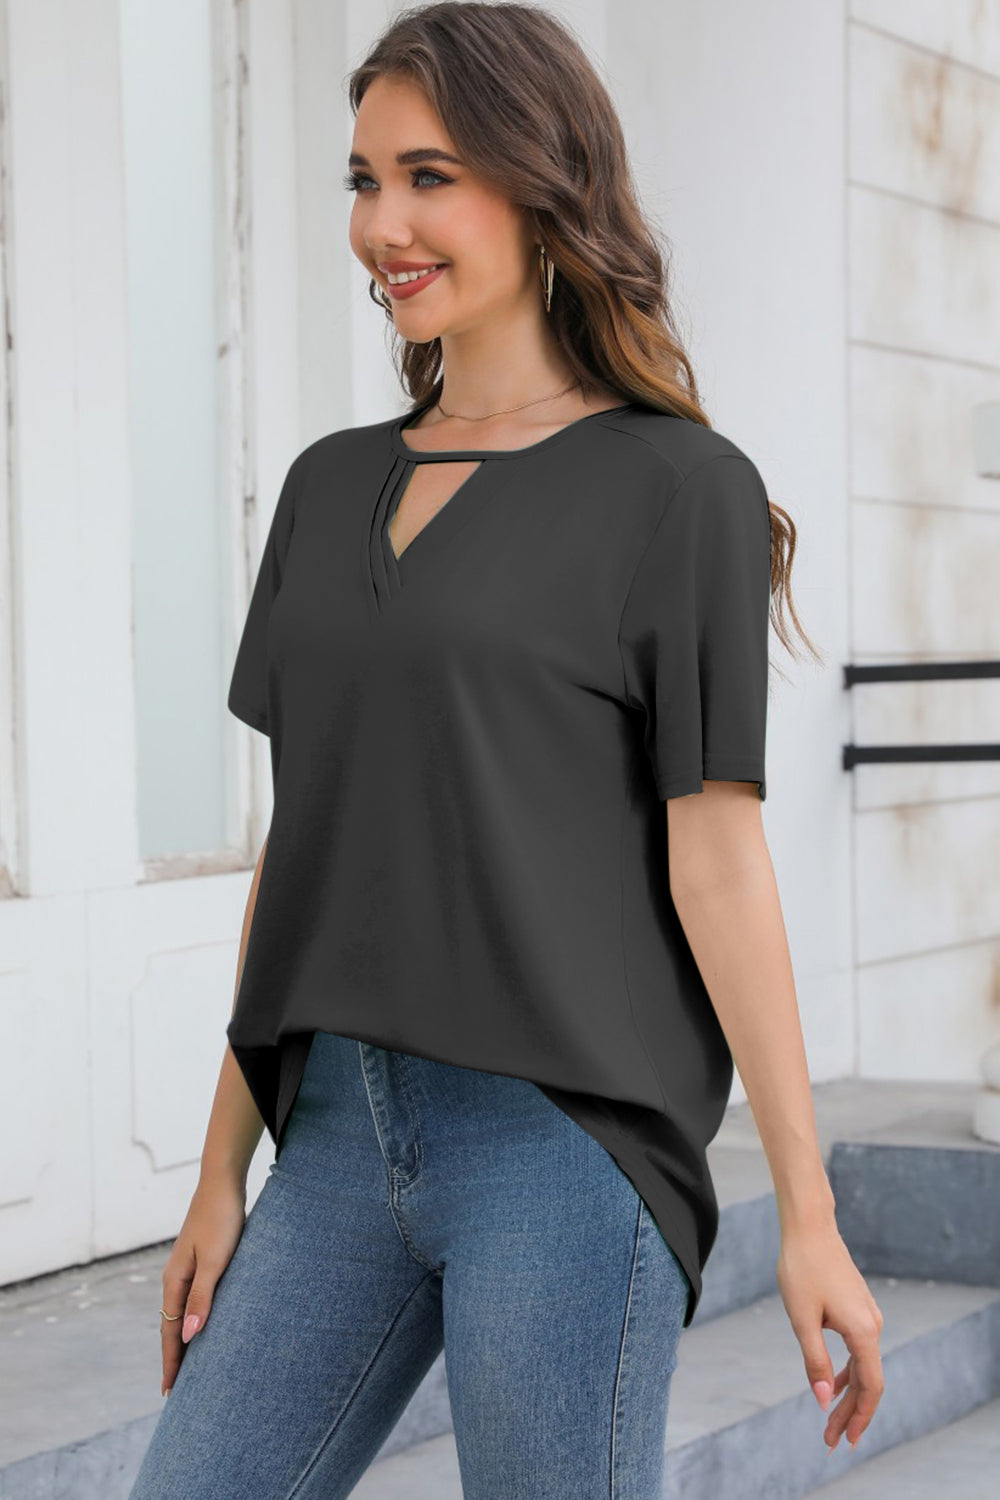 Stylish Cutout V-Neck Tee in vibrant colors, offering a relaxed fit for all-day comfort and versatile fashion. Perfect for any casual look.